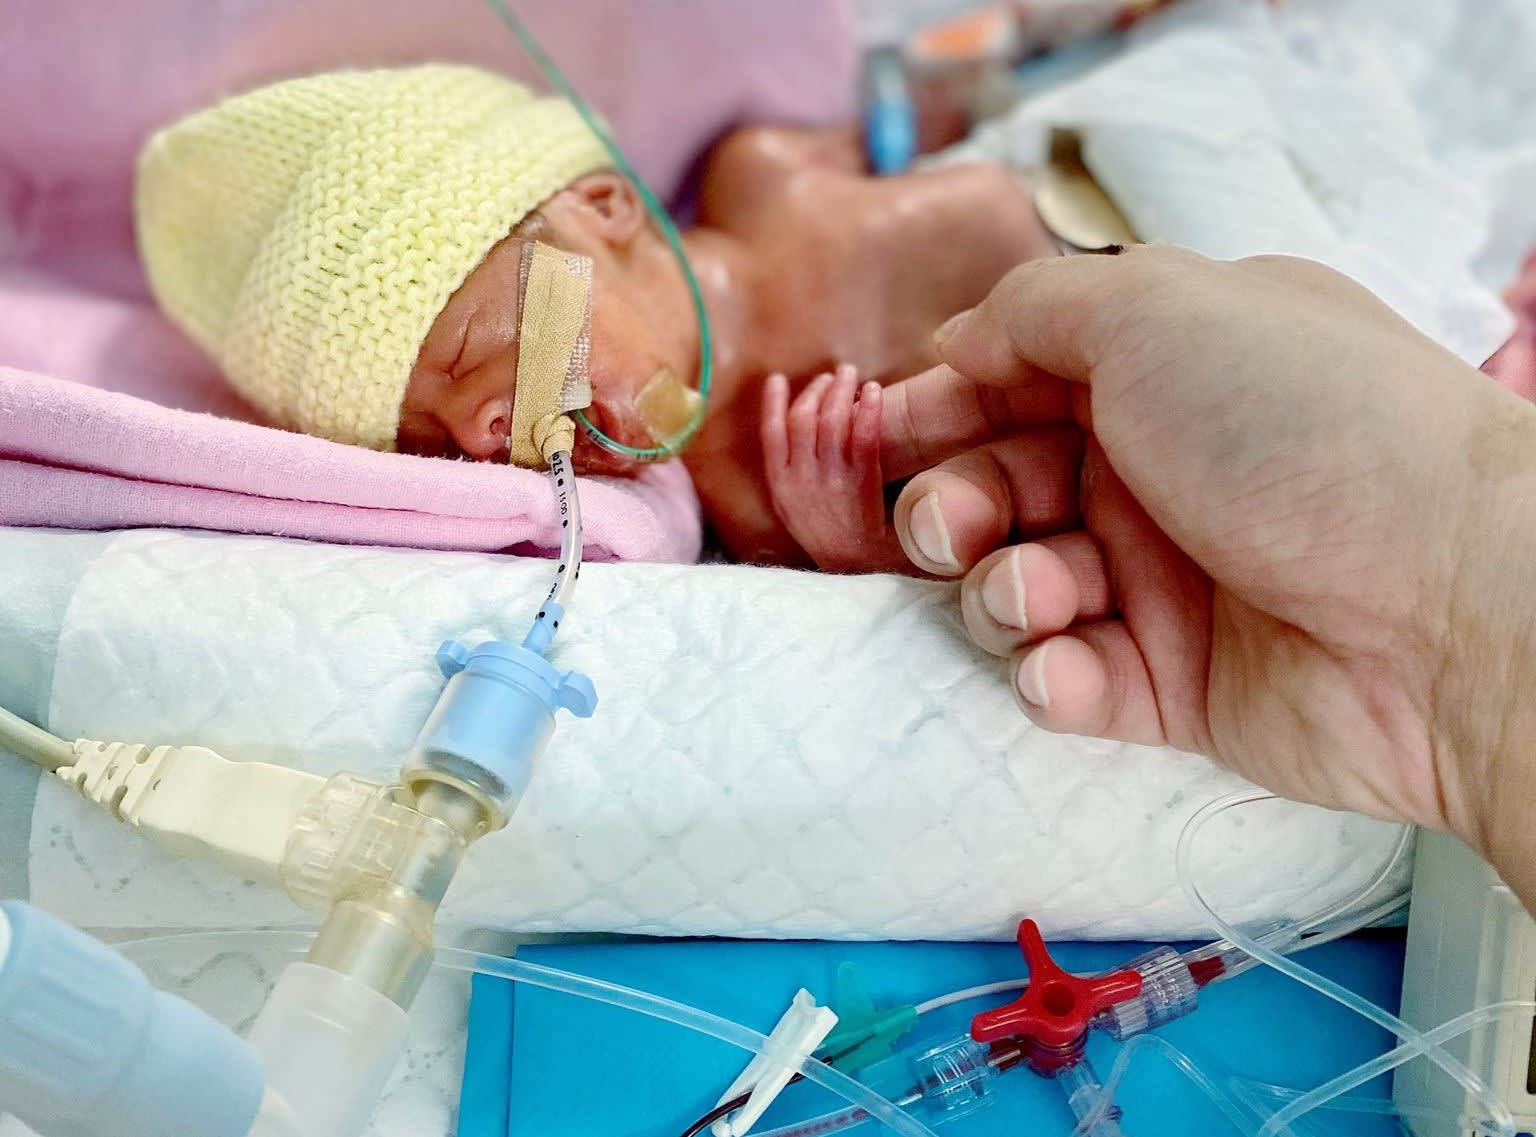 Premature baby ‘size of a palm’ home after 400 days in KKH, parents learn to rise above heartache 